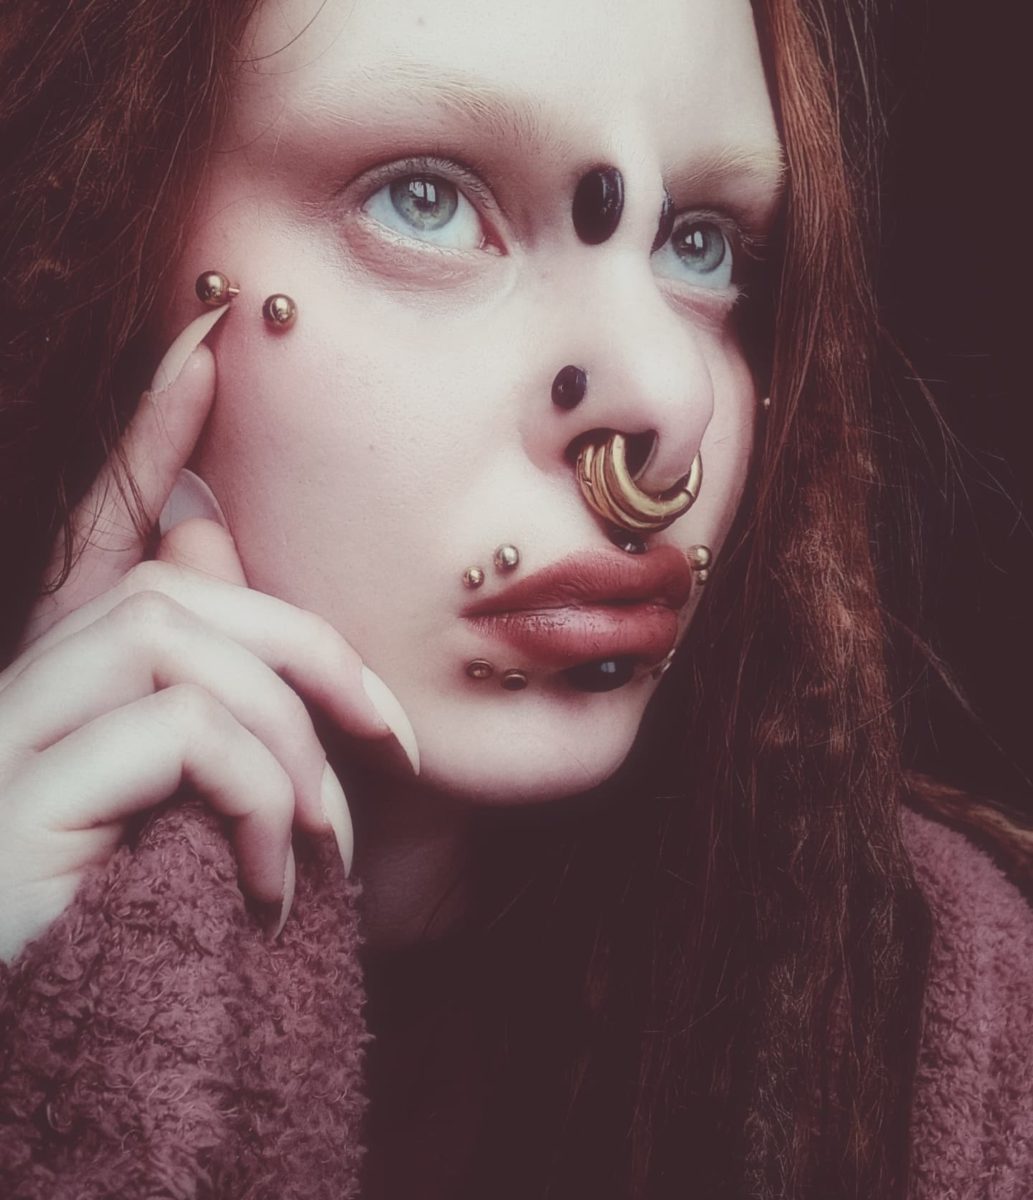 45 Extreme Piercings That Will Haunt You for Life | Ouch! Take a look at these extreme piercings and try not to wince.